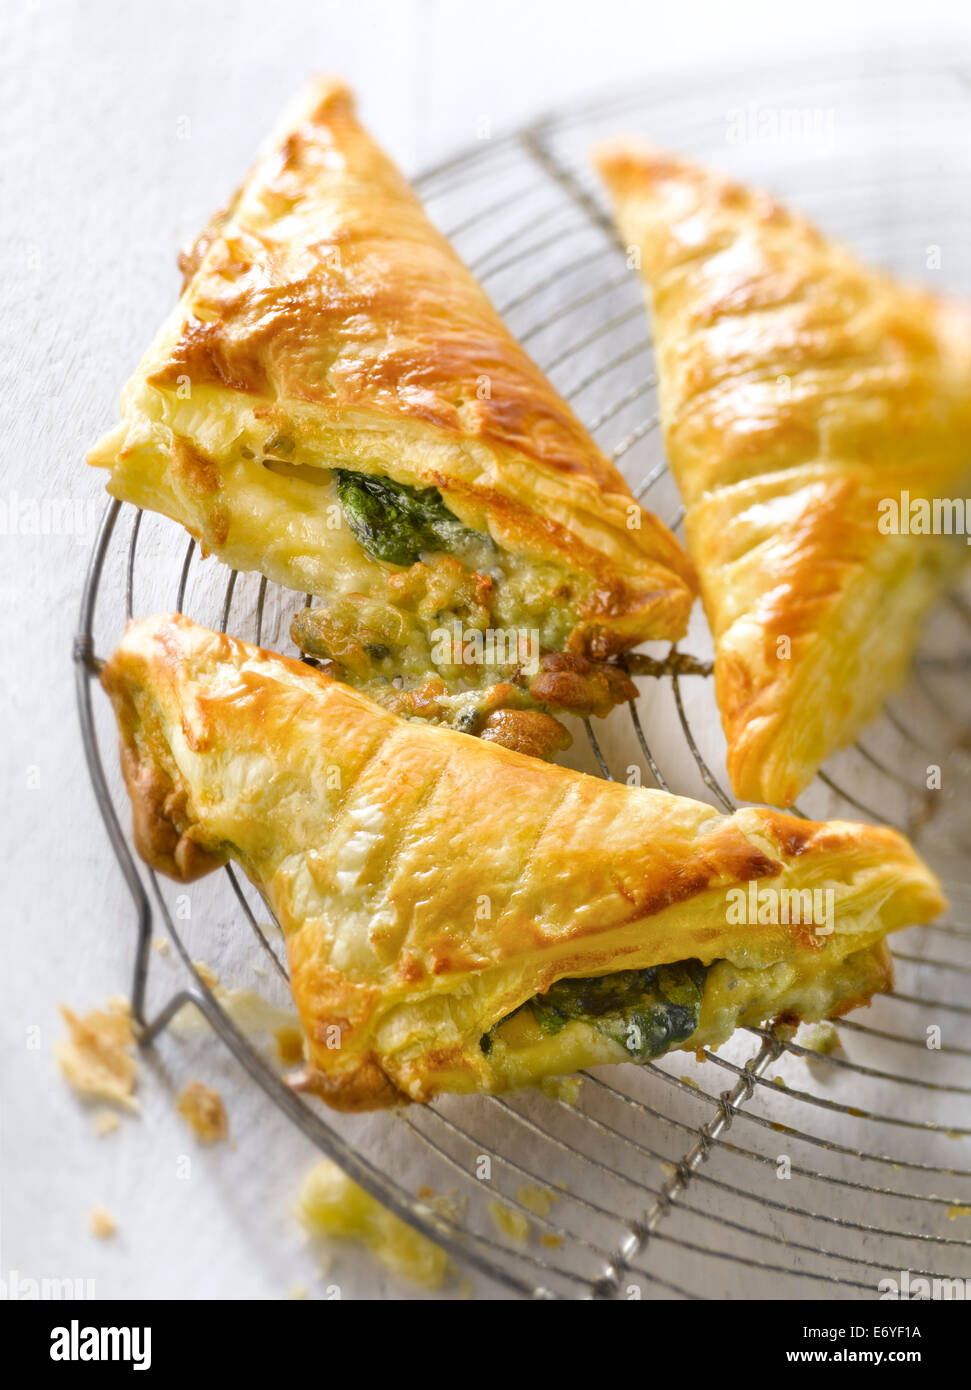 Spinach-roquefort flaky pastry triangular pies Stock Photo